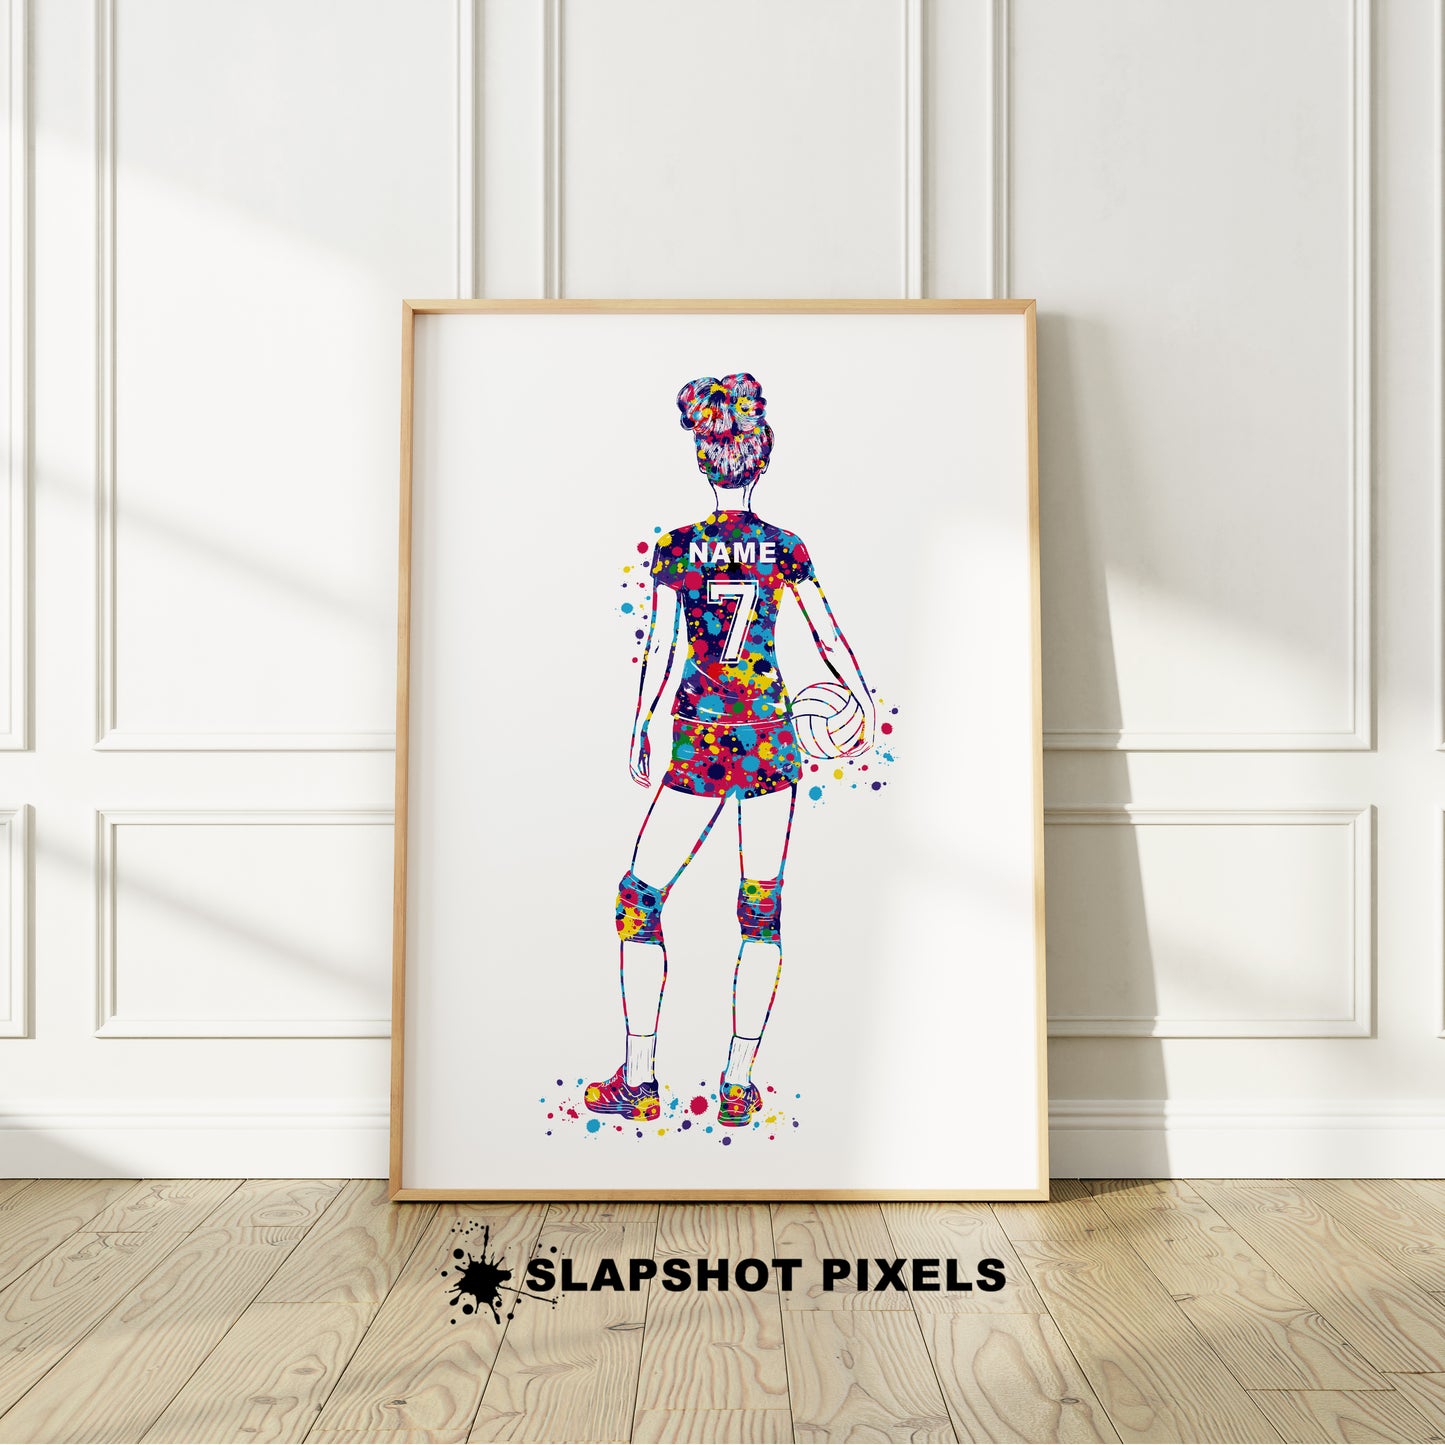 Personalized volleyball poster showing a girl volleyball player facing backwards with a custom name and number on the volleyball jersey. Designed in colorful watercolor splatters. Perfect volleyball gifts for girls, volleyball prints, volleyball wall art décor in a girls bedroom and birthday gifts for girls.